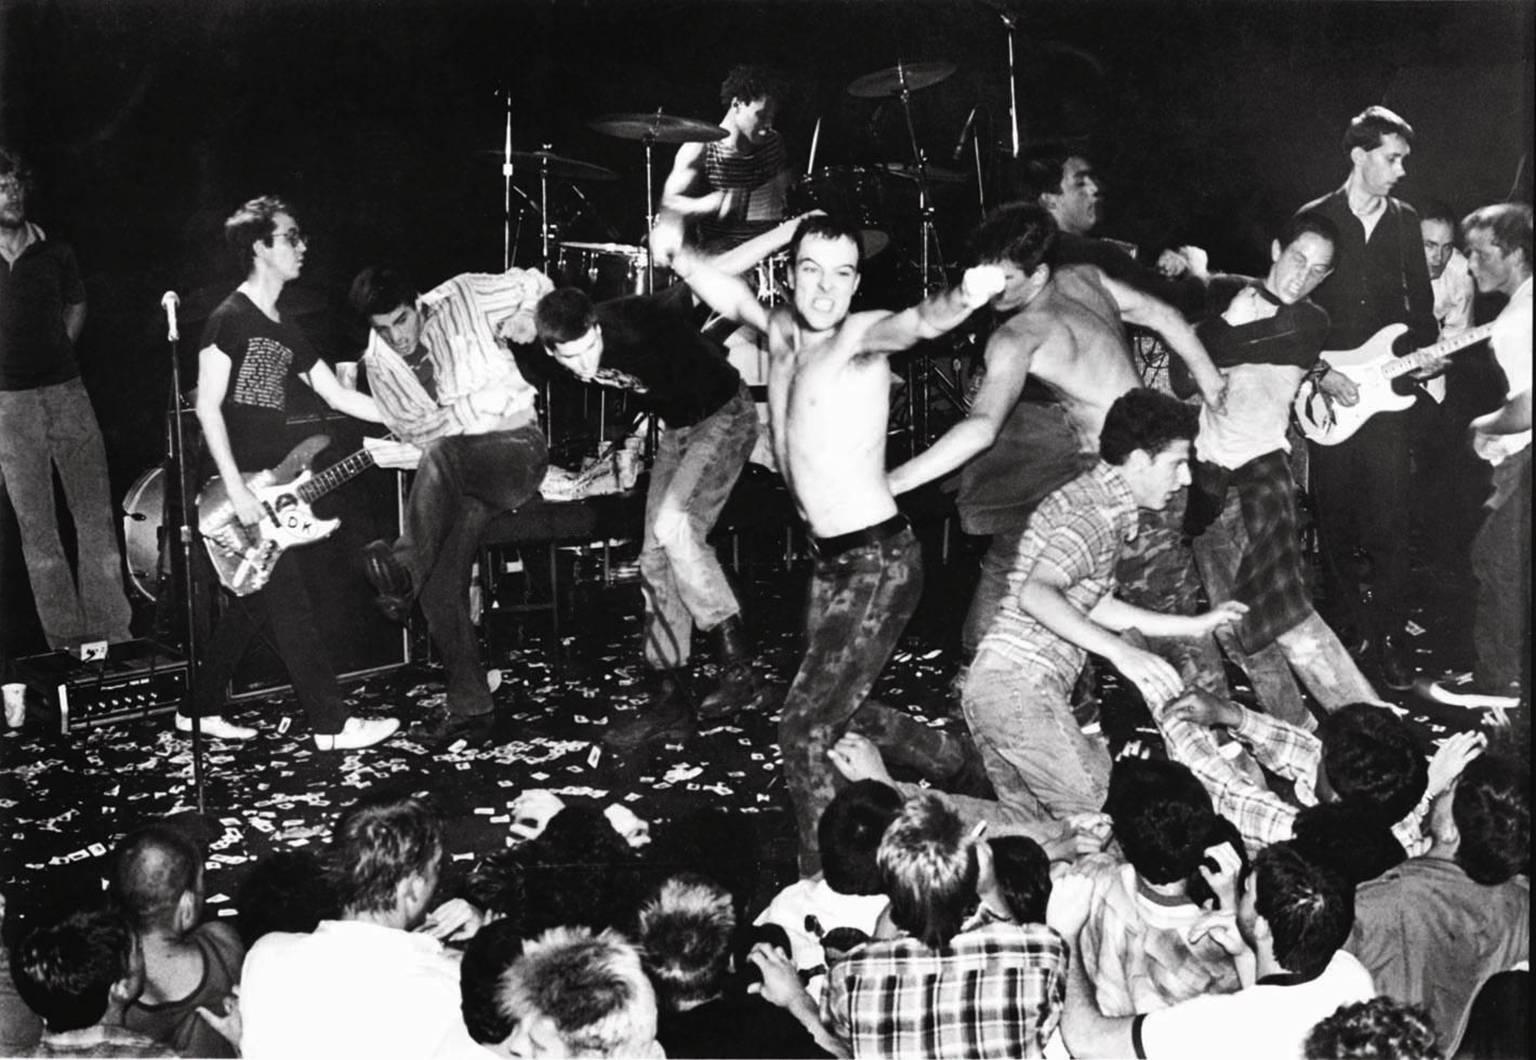 Edward Colver Black and White Photograph - Dead Kennedys, Los Angeles, CA, July 4, 1982